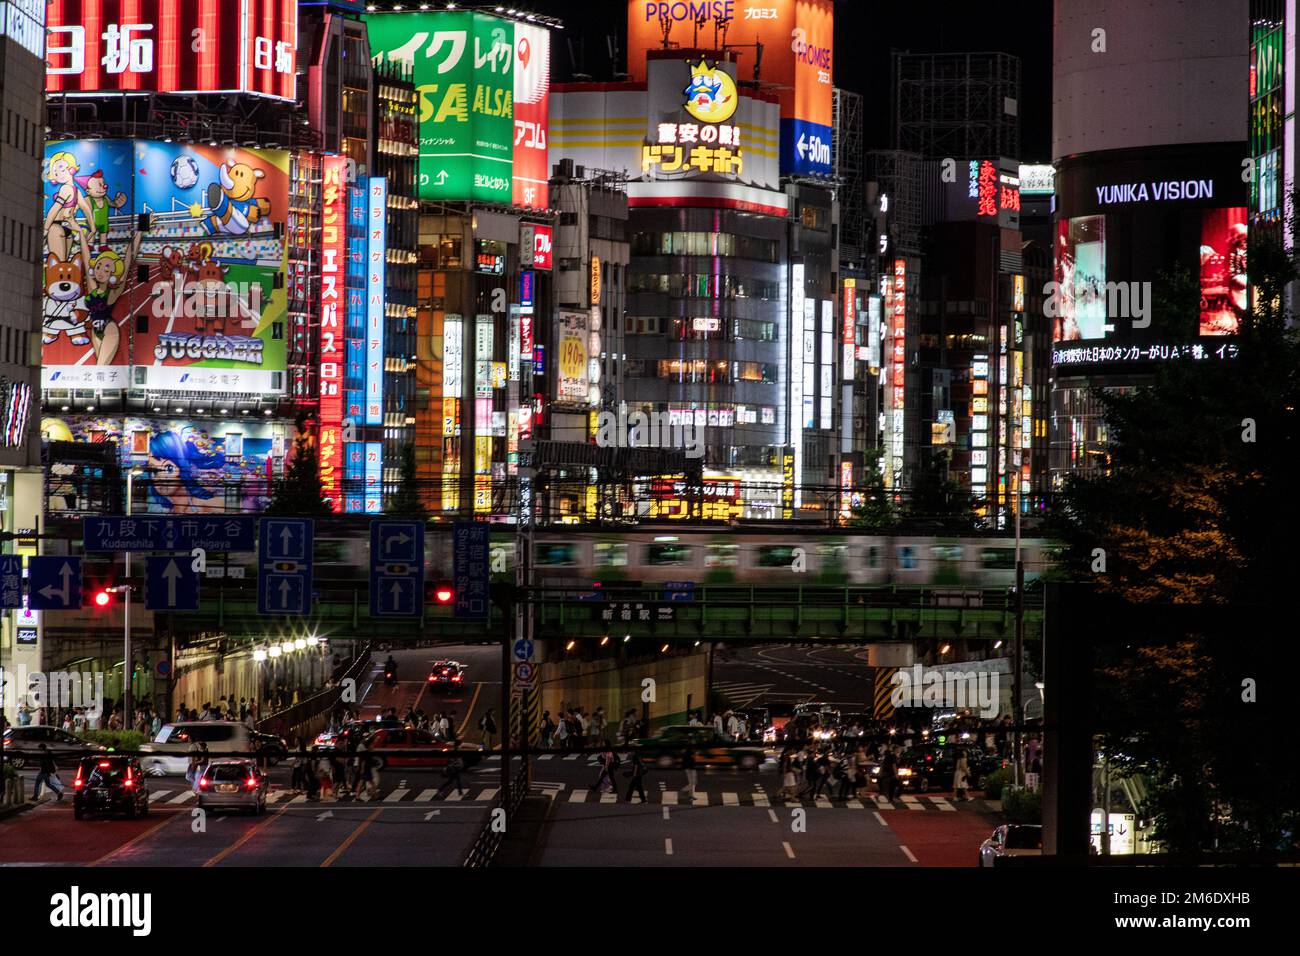 Tokyo, Japan - 16 6 2019: A night time view of Shinjuku and the neon signs Stock Photo